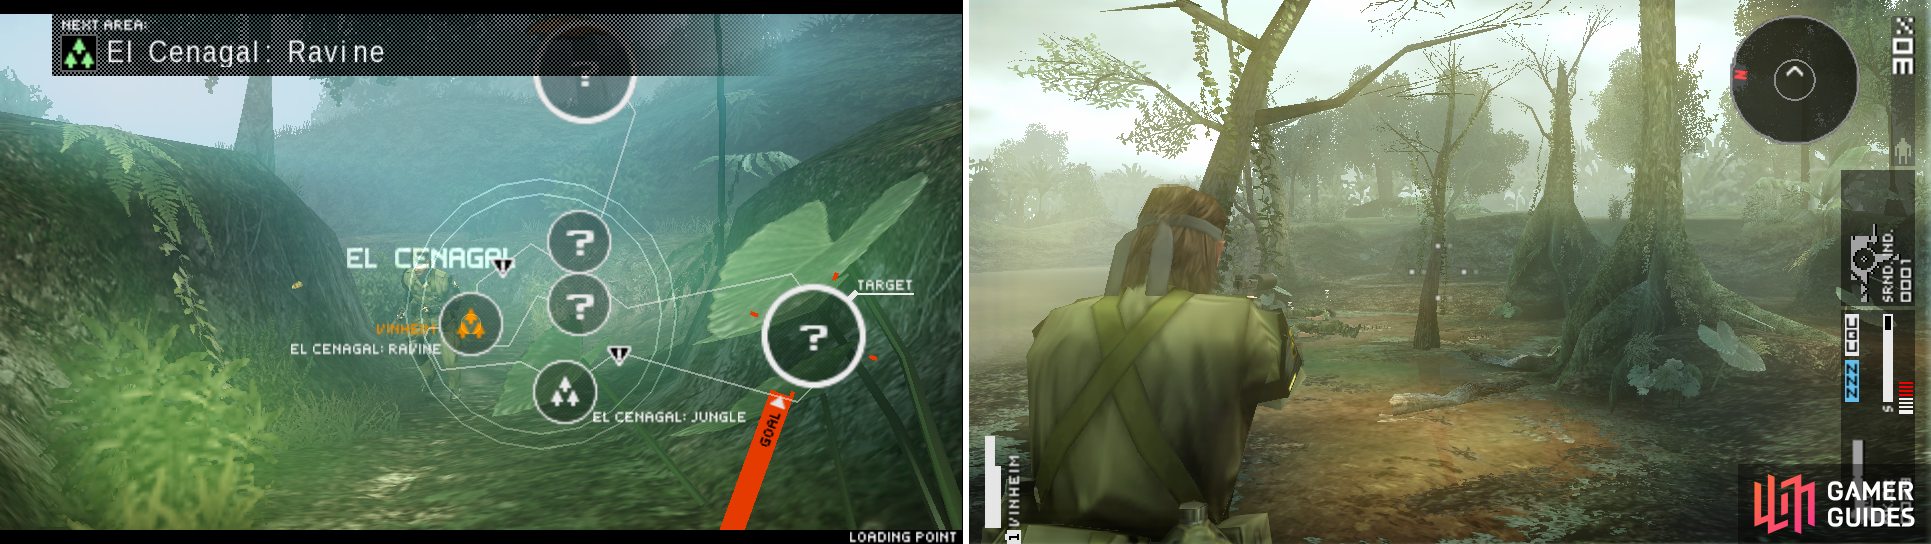 Entering El Cenegal: Ravine where there are no enemies (left picture) and once at El Cenegal: Swamp (right picture) which is marked as the best place to shoot down all 3 enemies.